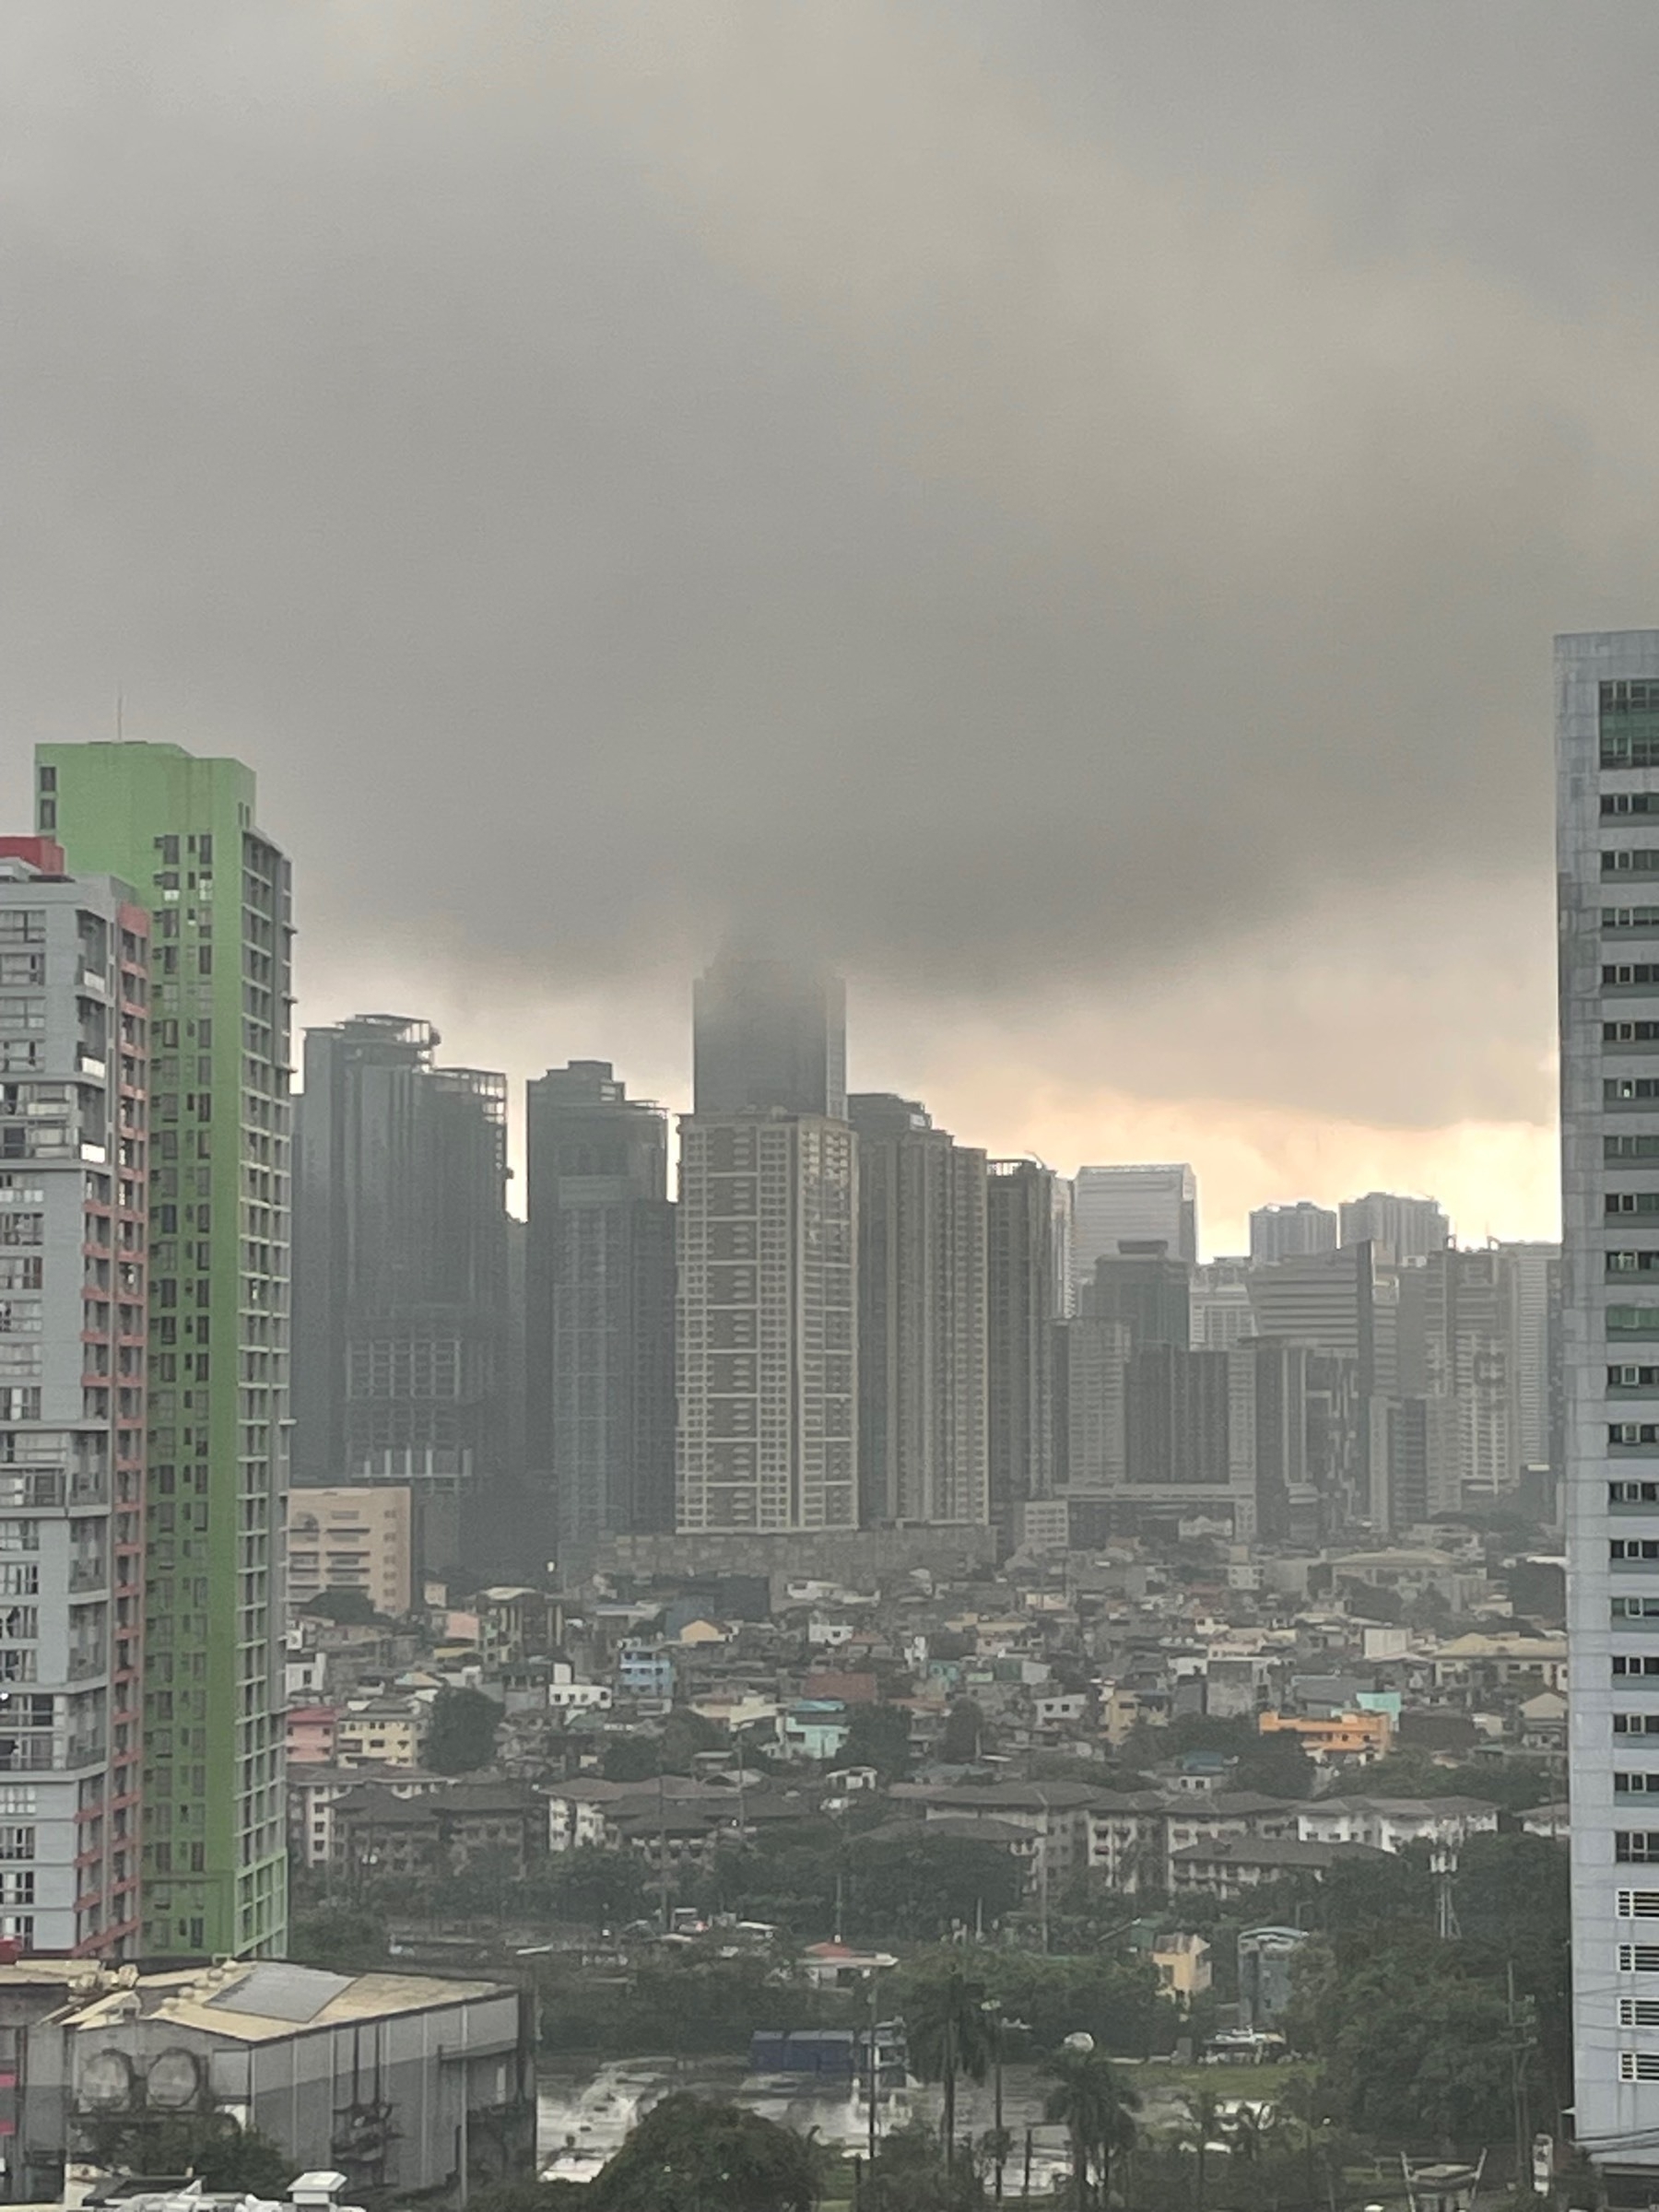 A peek out of Chi's window, where the rain clouds look lower than usual, obscuring the usual city skyline you'd see from the central business district where she lives.